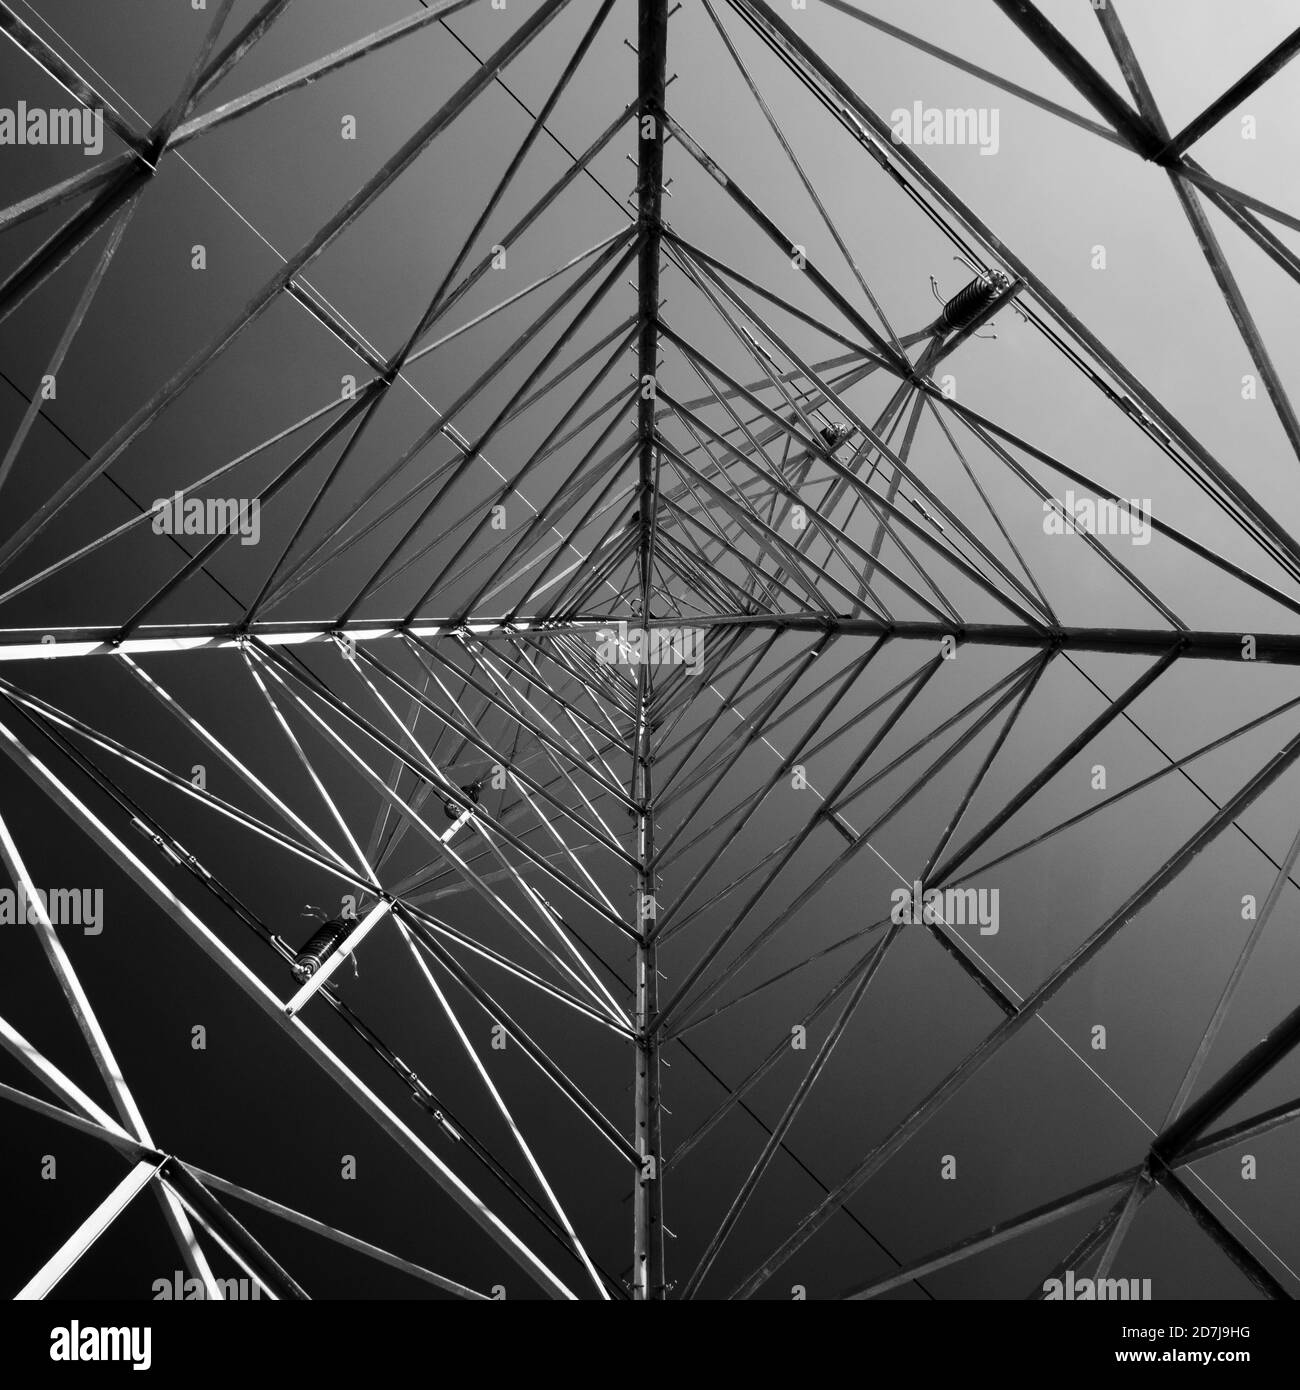 An abstract black and white view looking up at a high voltage electricity pylon. Stock Photo